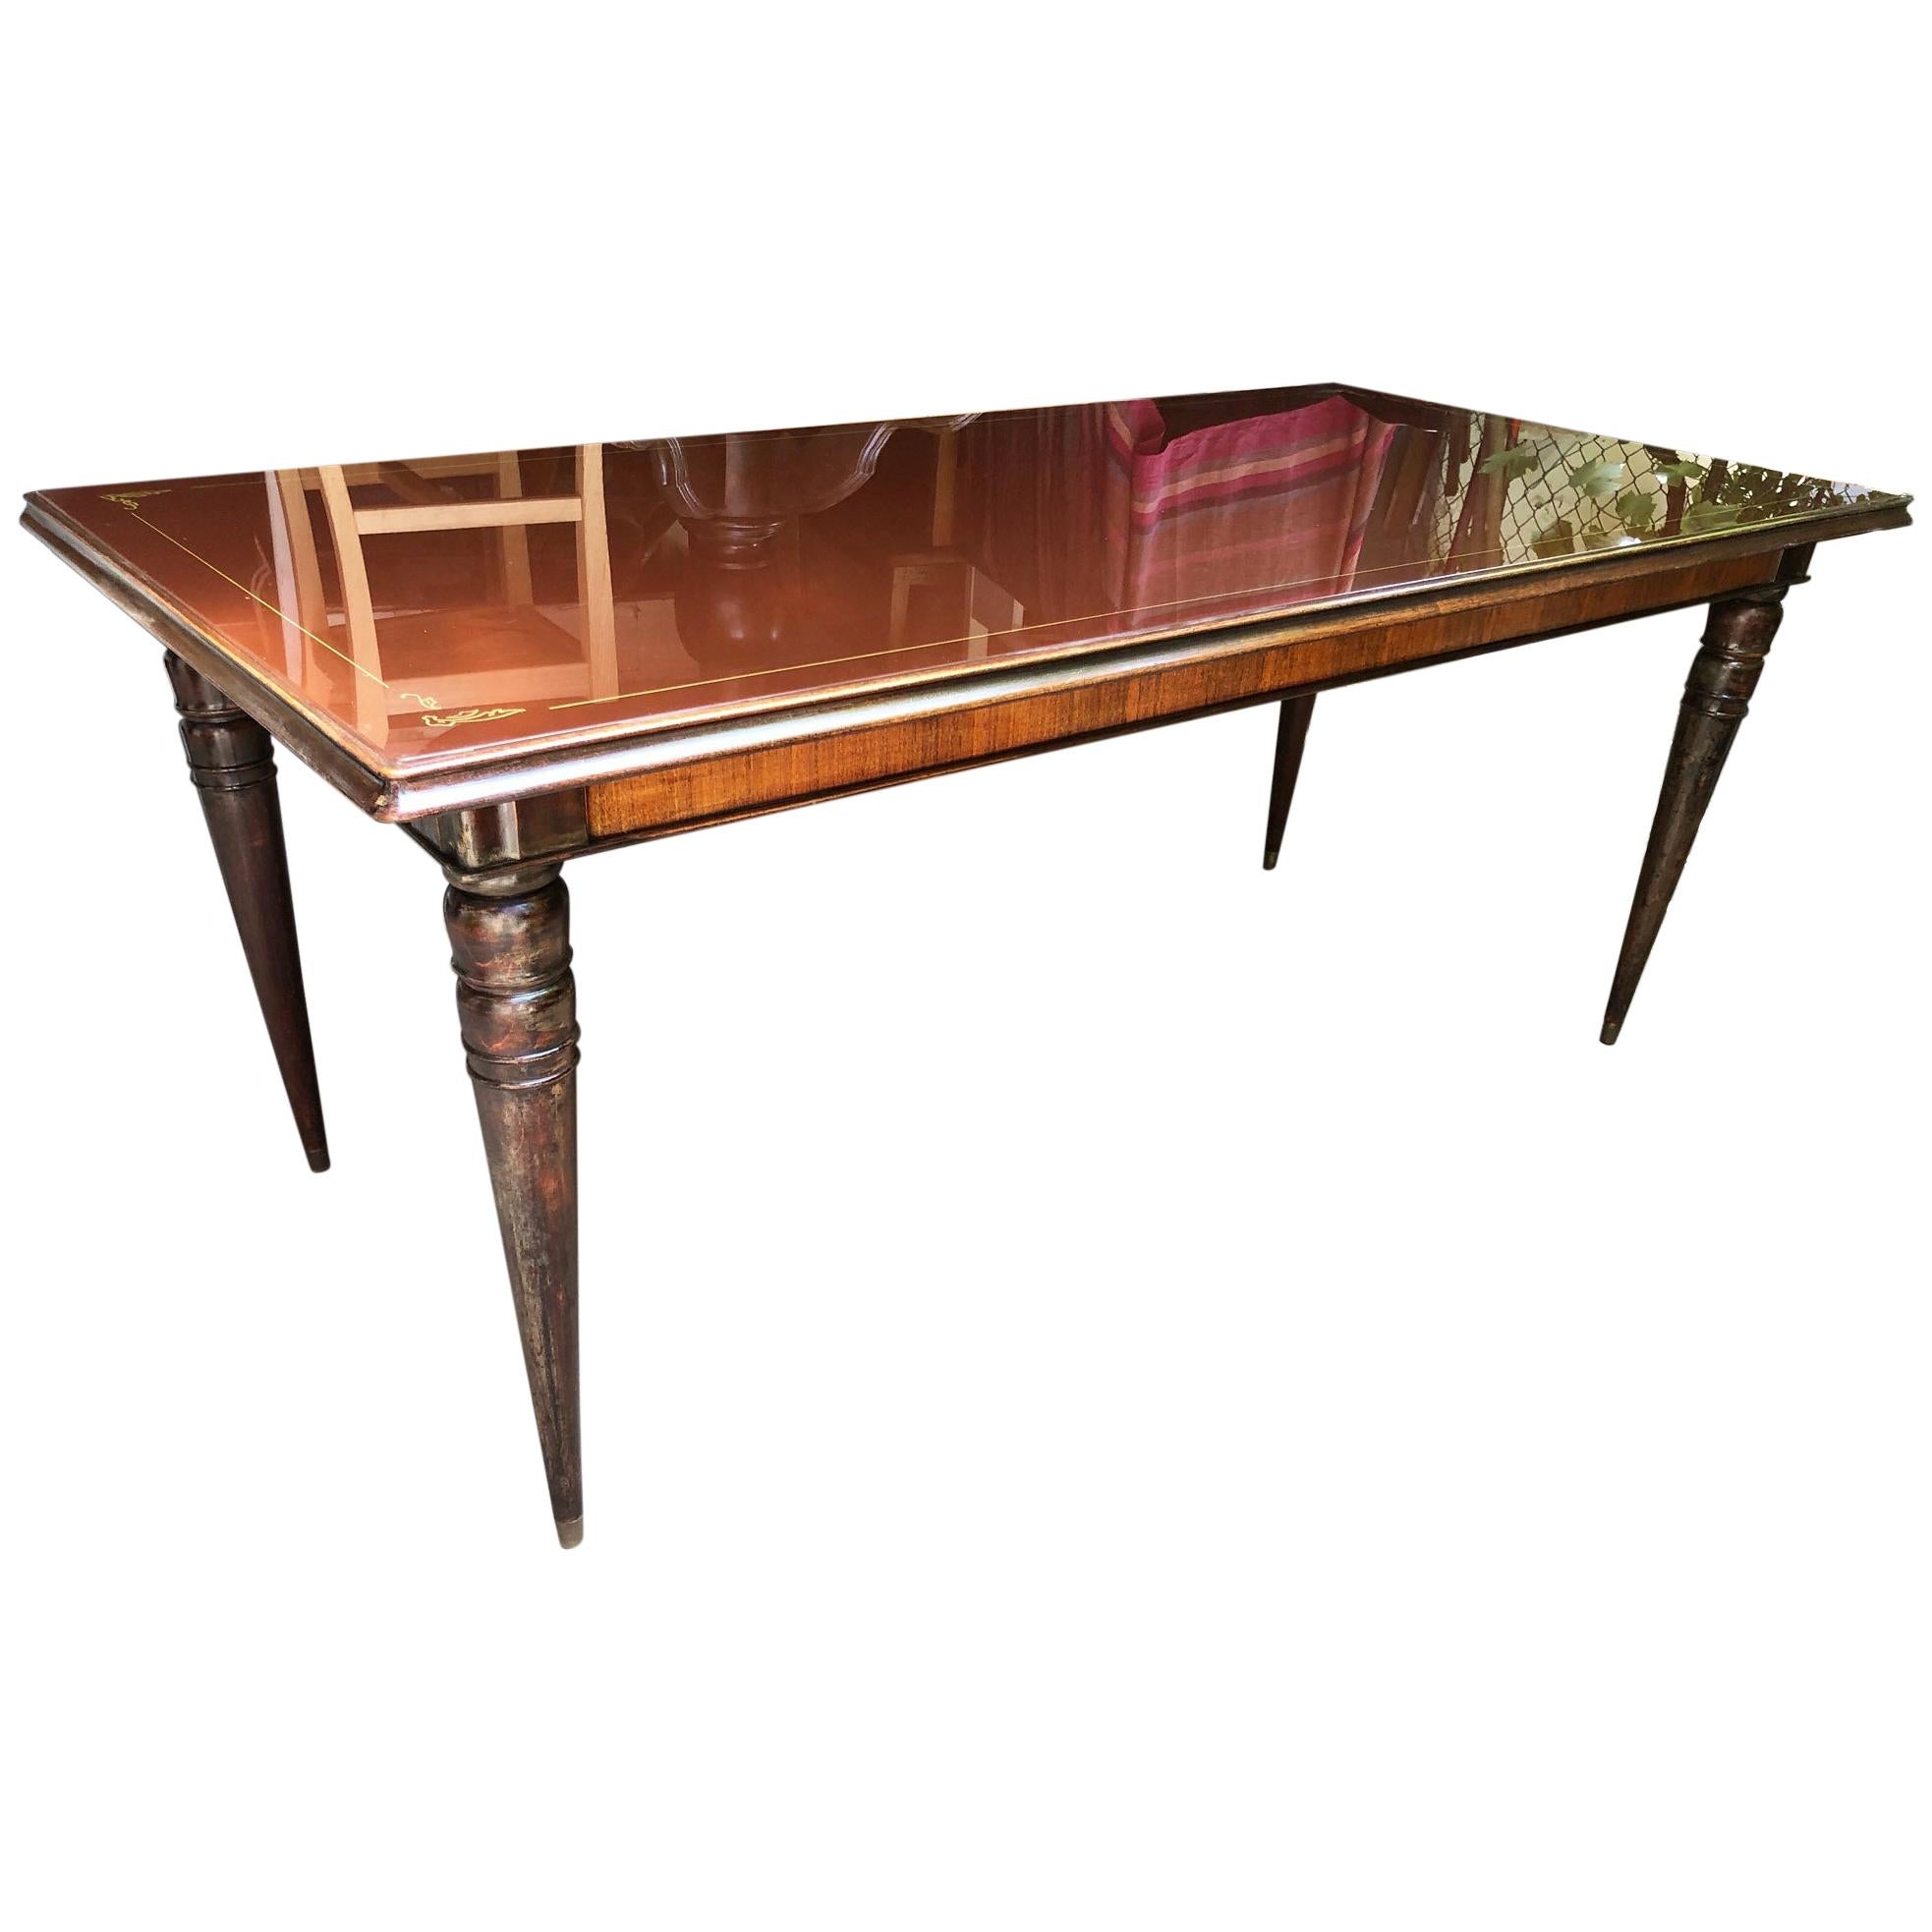 Italian Table from 1960, Original in Walnut, with Turned Leg, Brown Glass Top